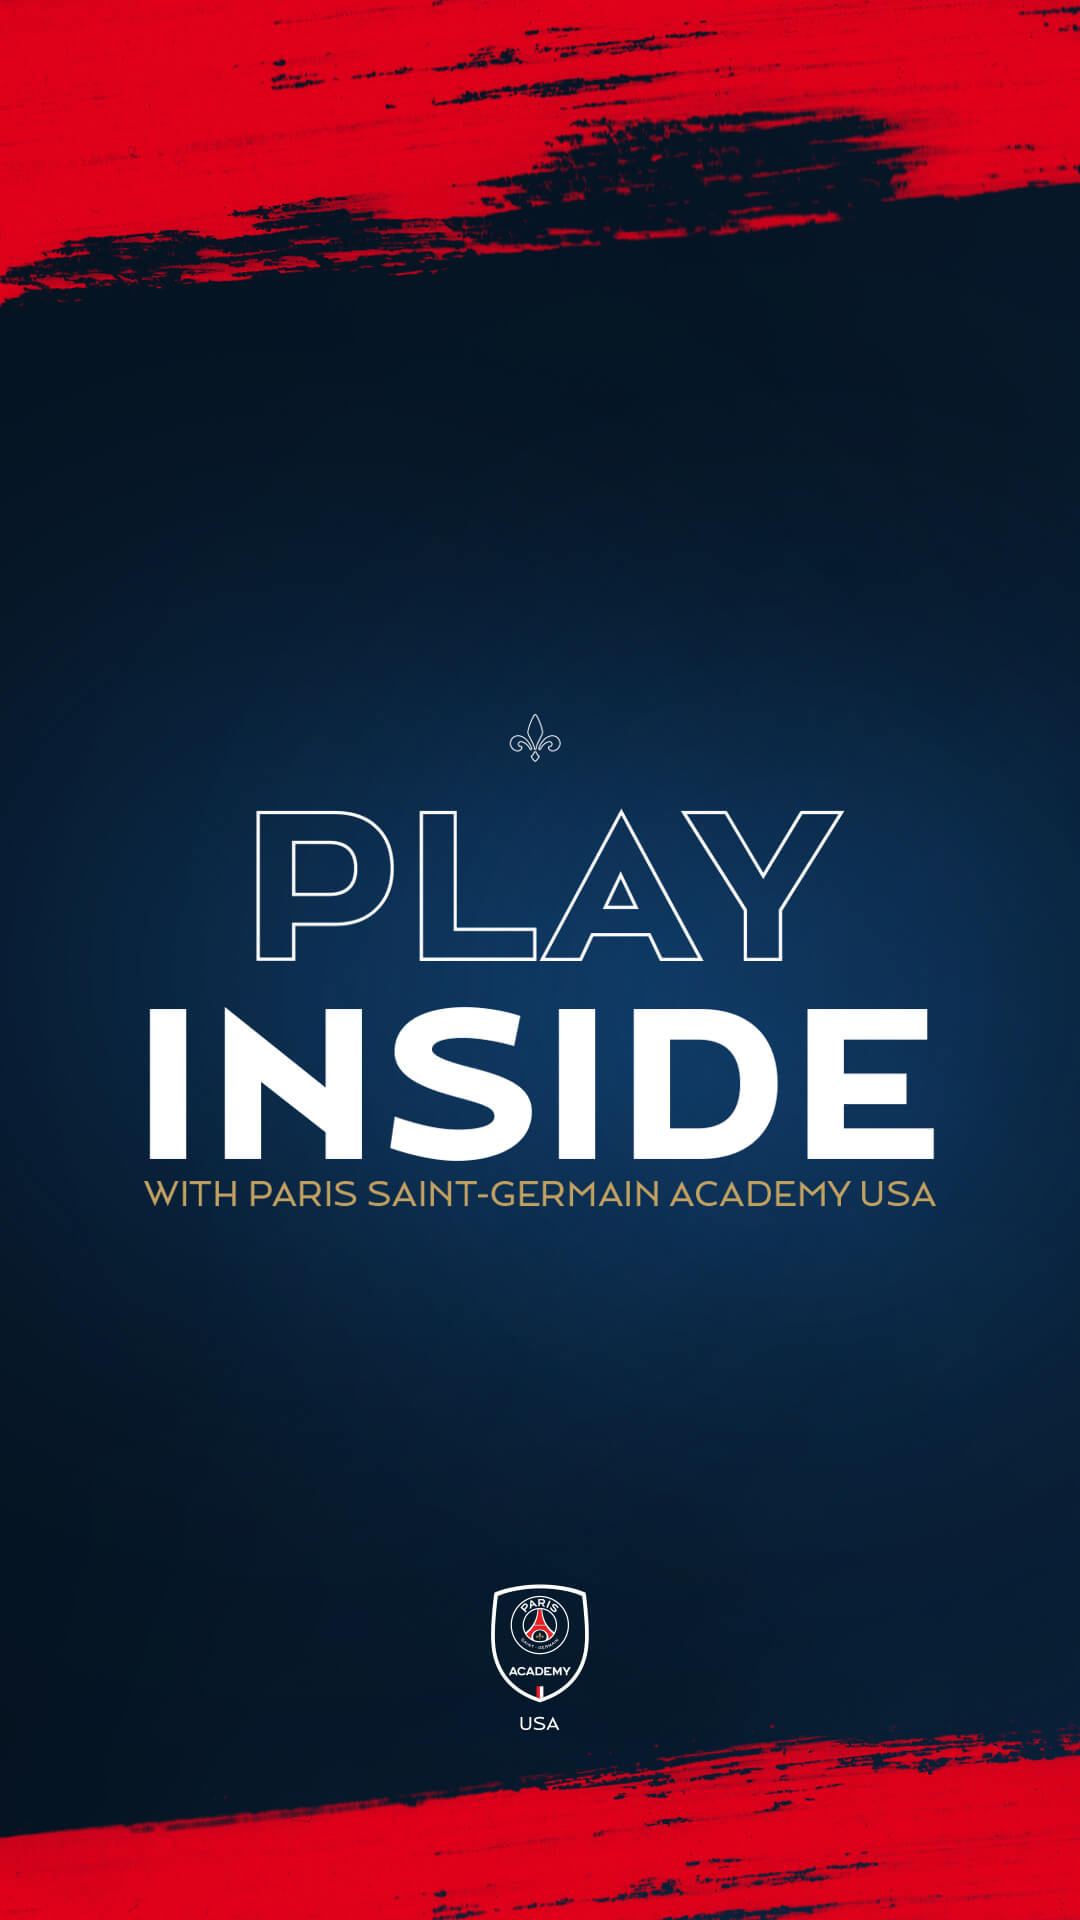 PLAY-INSIDE-background